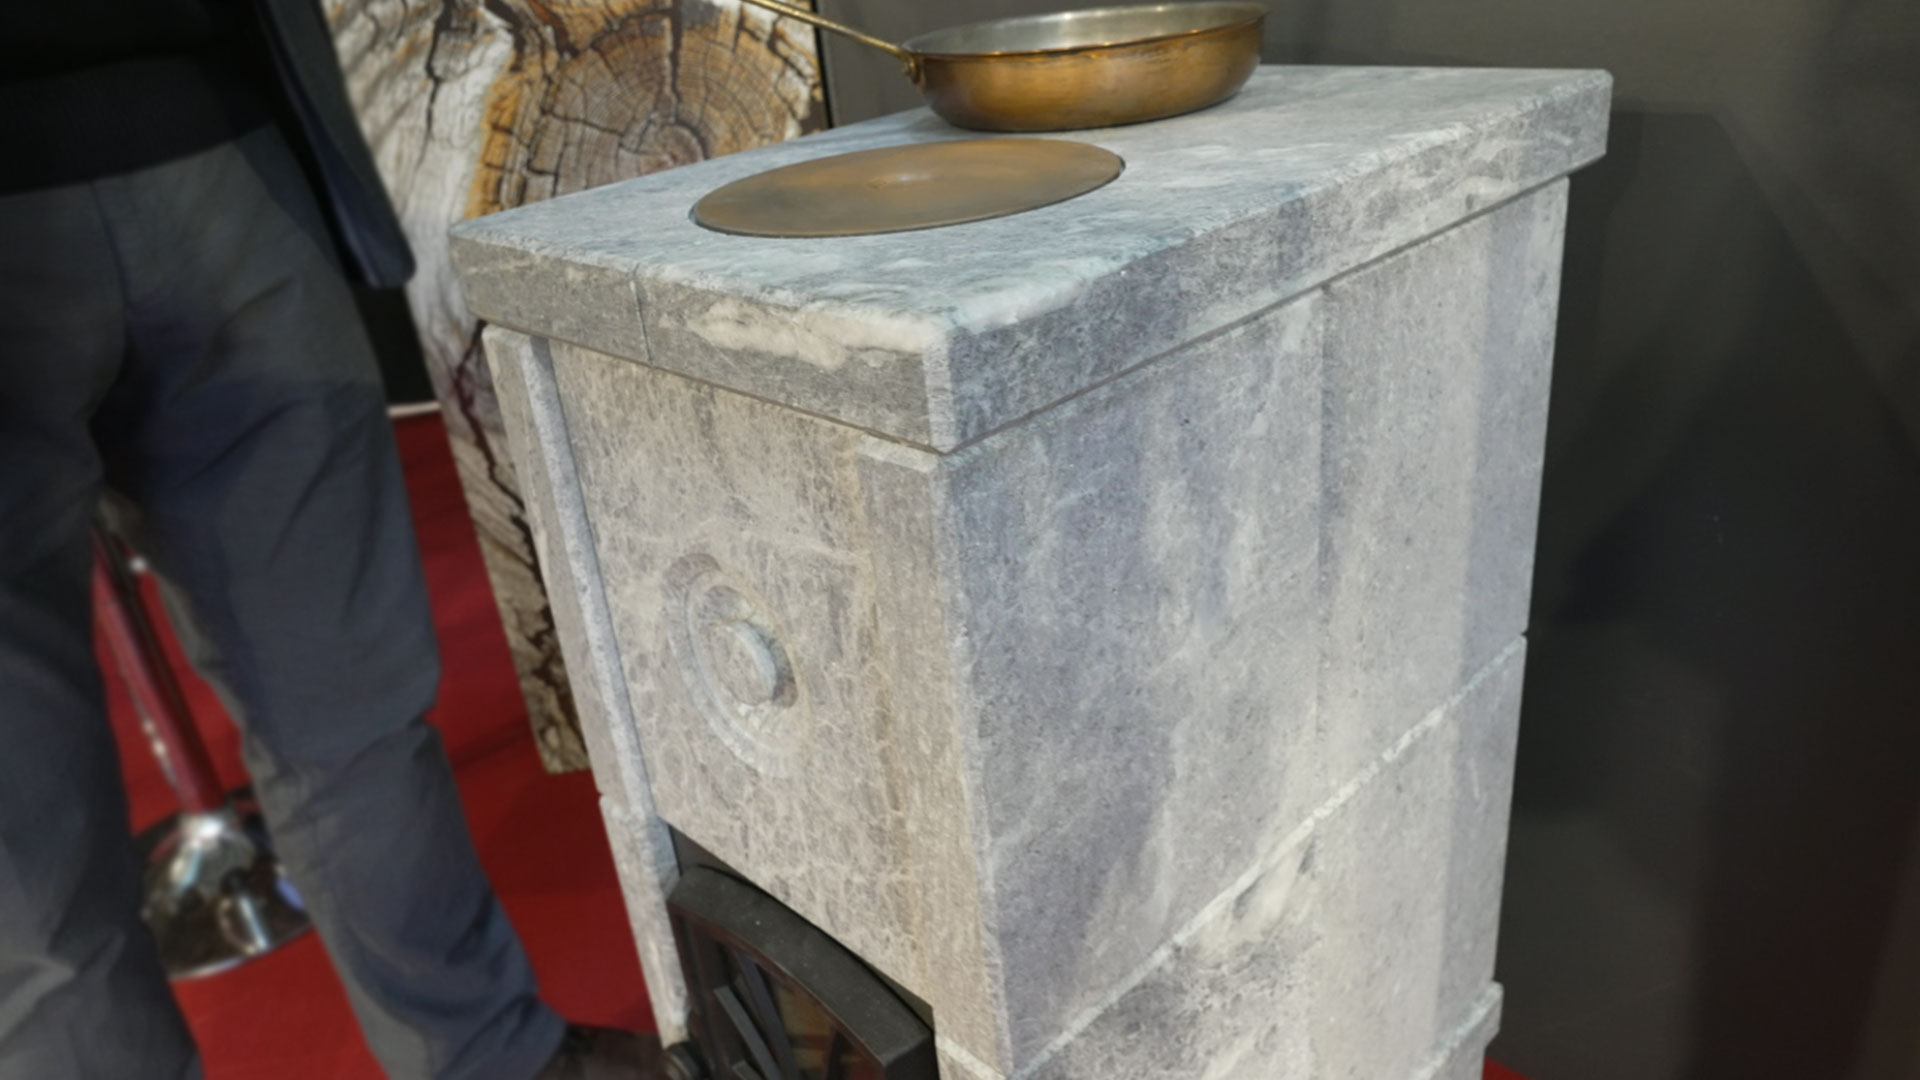 Soapstone stove with cooktop